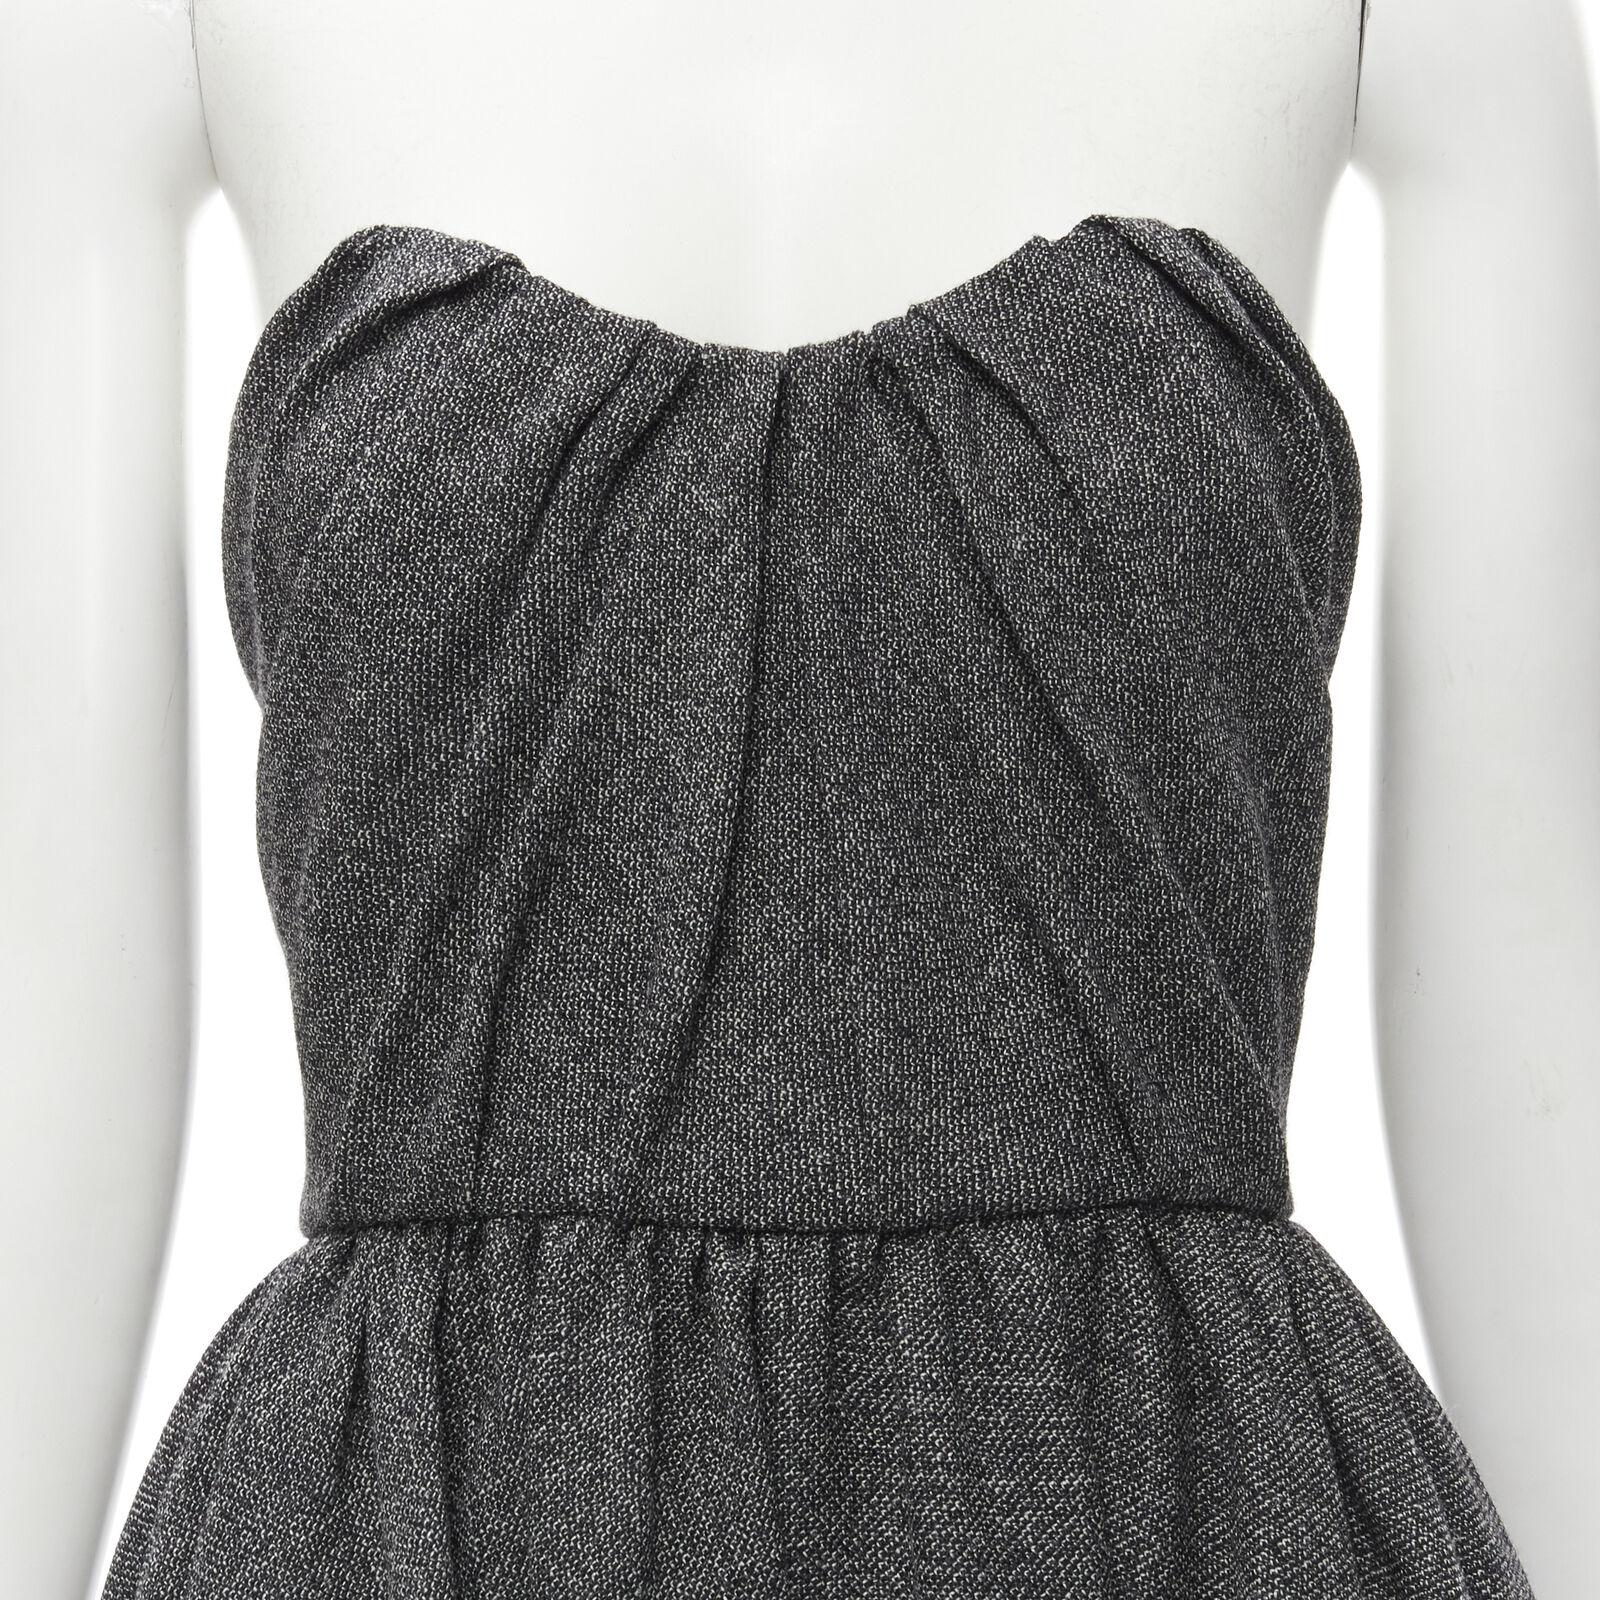 CHRISTIAN DIOR 100% virgin wool grey sweetheart bustier midi gown FR34 XS
Reference: AAWC/A00067
Brand: Christian Dior
Designer: Maria Grazia Chiuri
Material: Virgin Wool
Color: Grey
Pattern: Solid
Closure: Zip
Lining: Silk
Extra Details: Boned